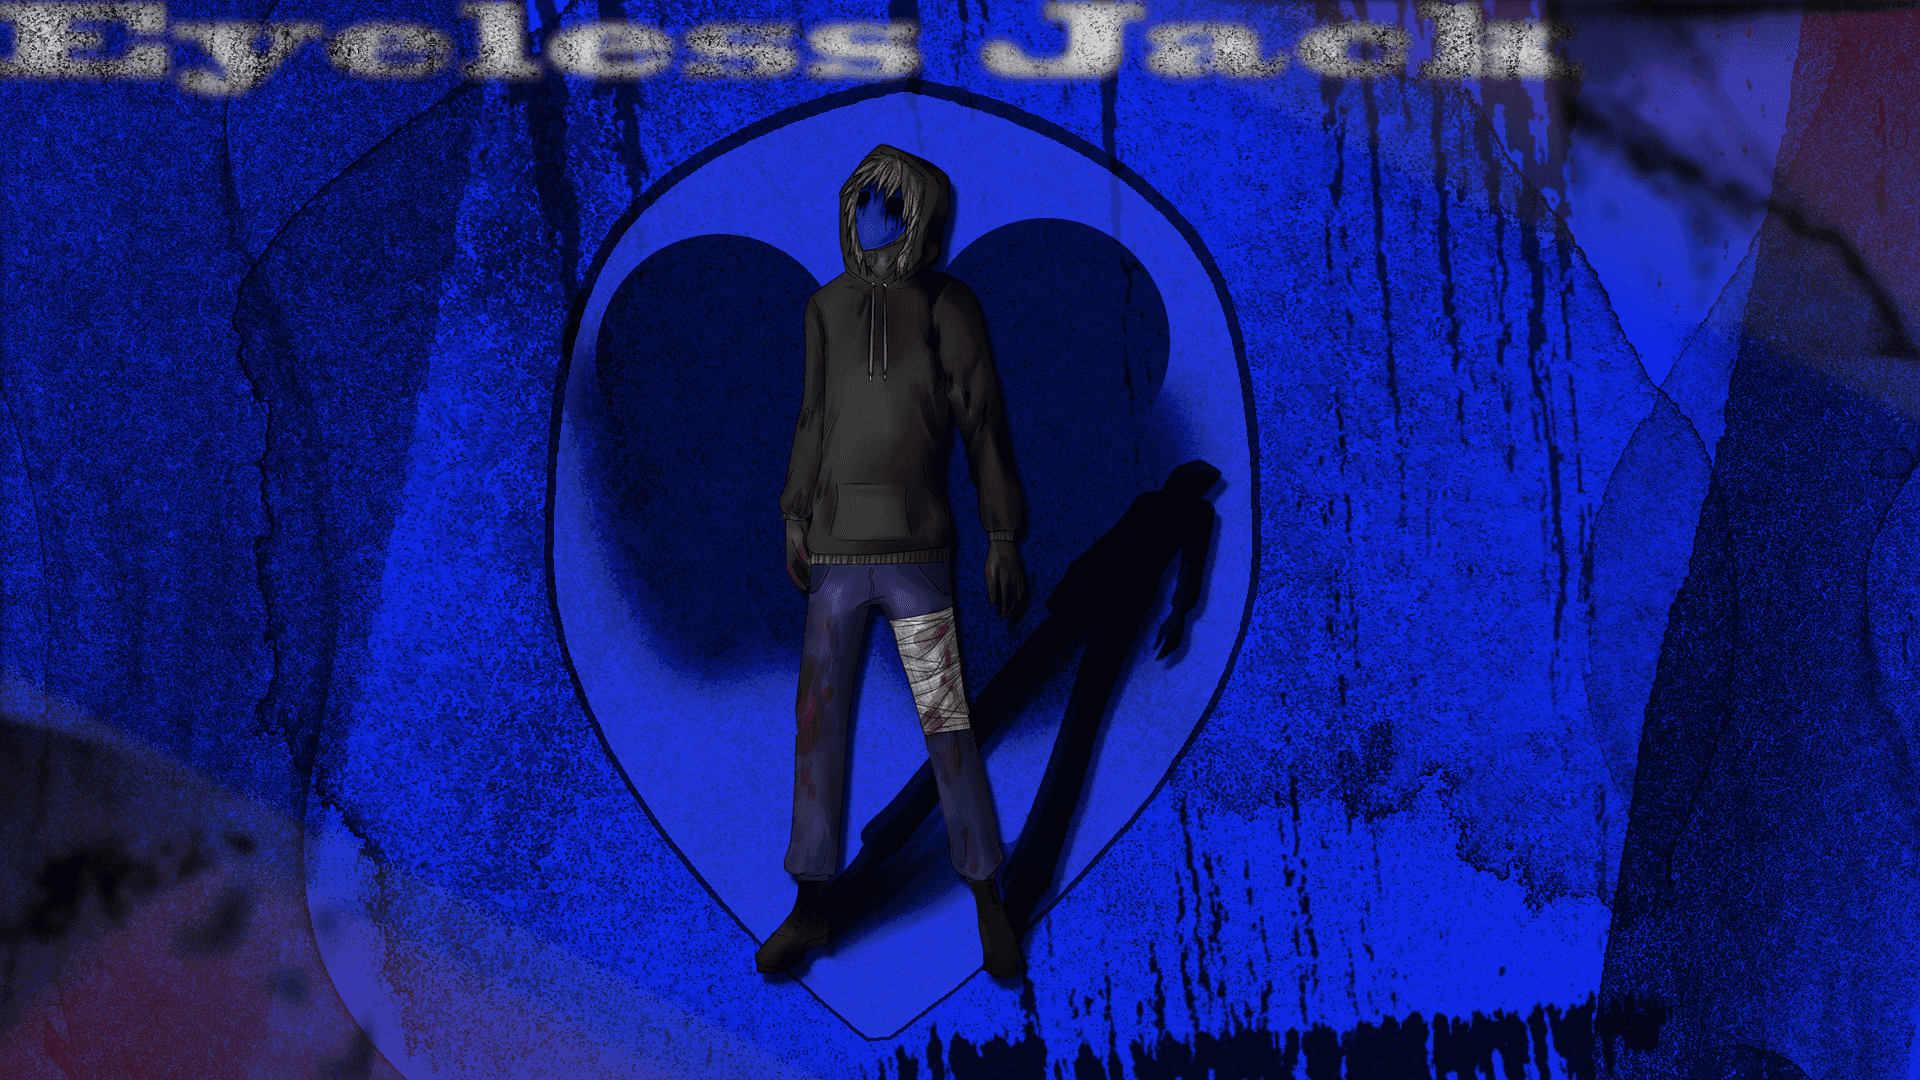 Mysterious Figure In Darkness - Eyeless Jack Illustration